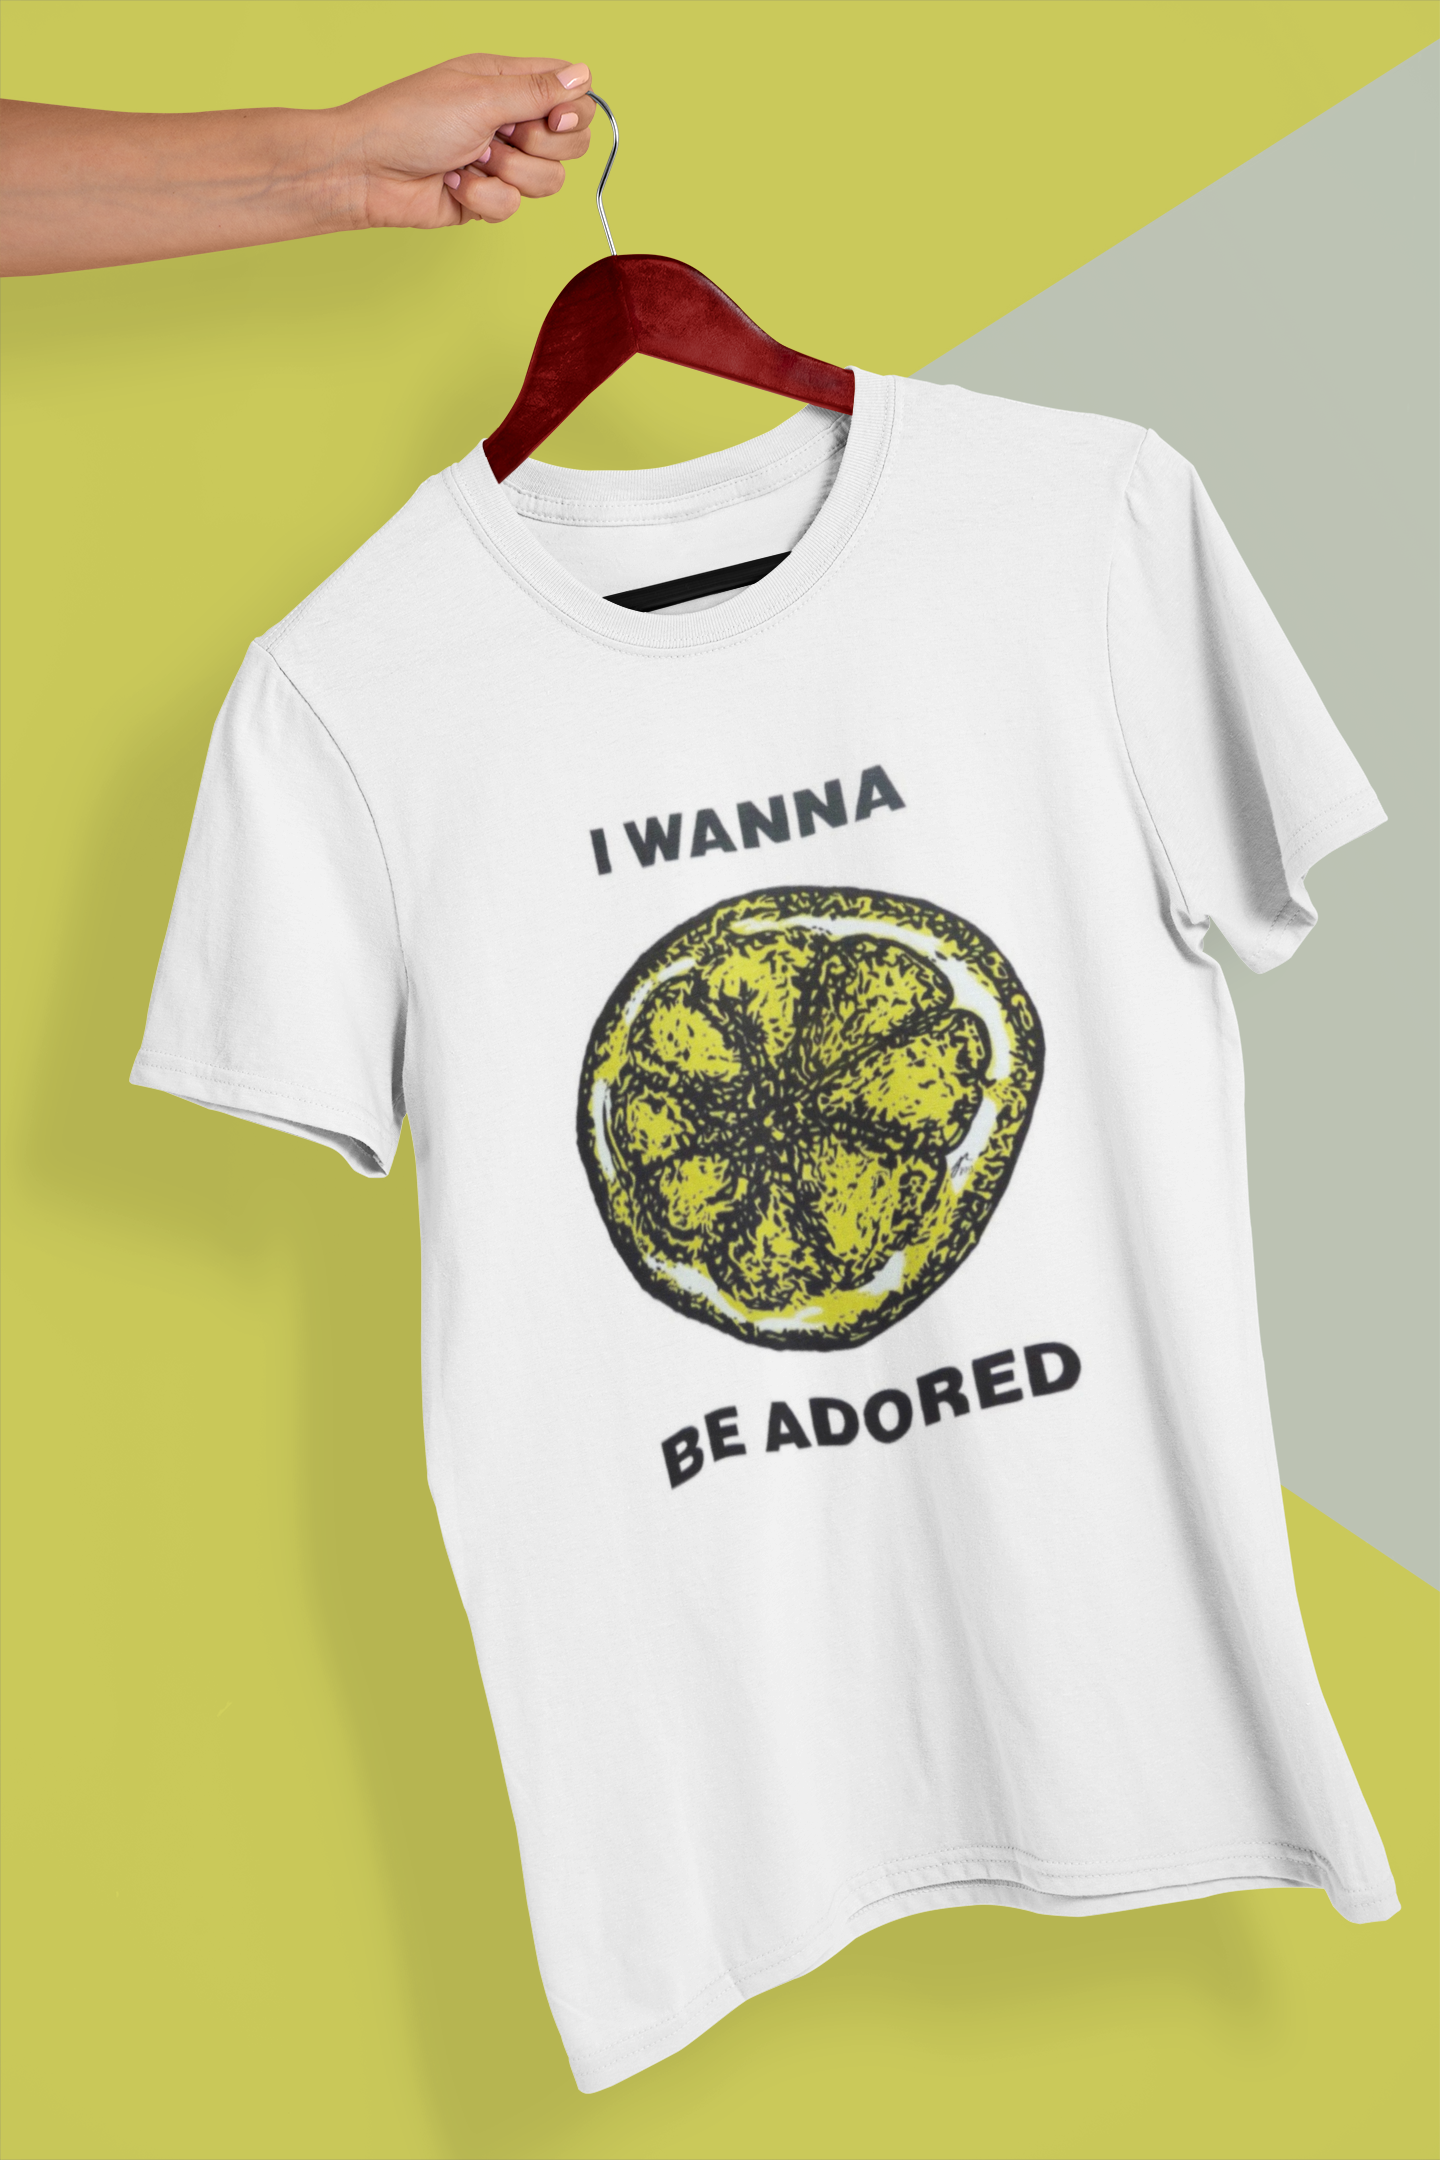 ADORED Classic Fit AmplifyDestroy Print Tee Shirt stone roses